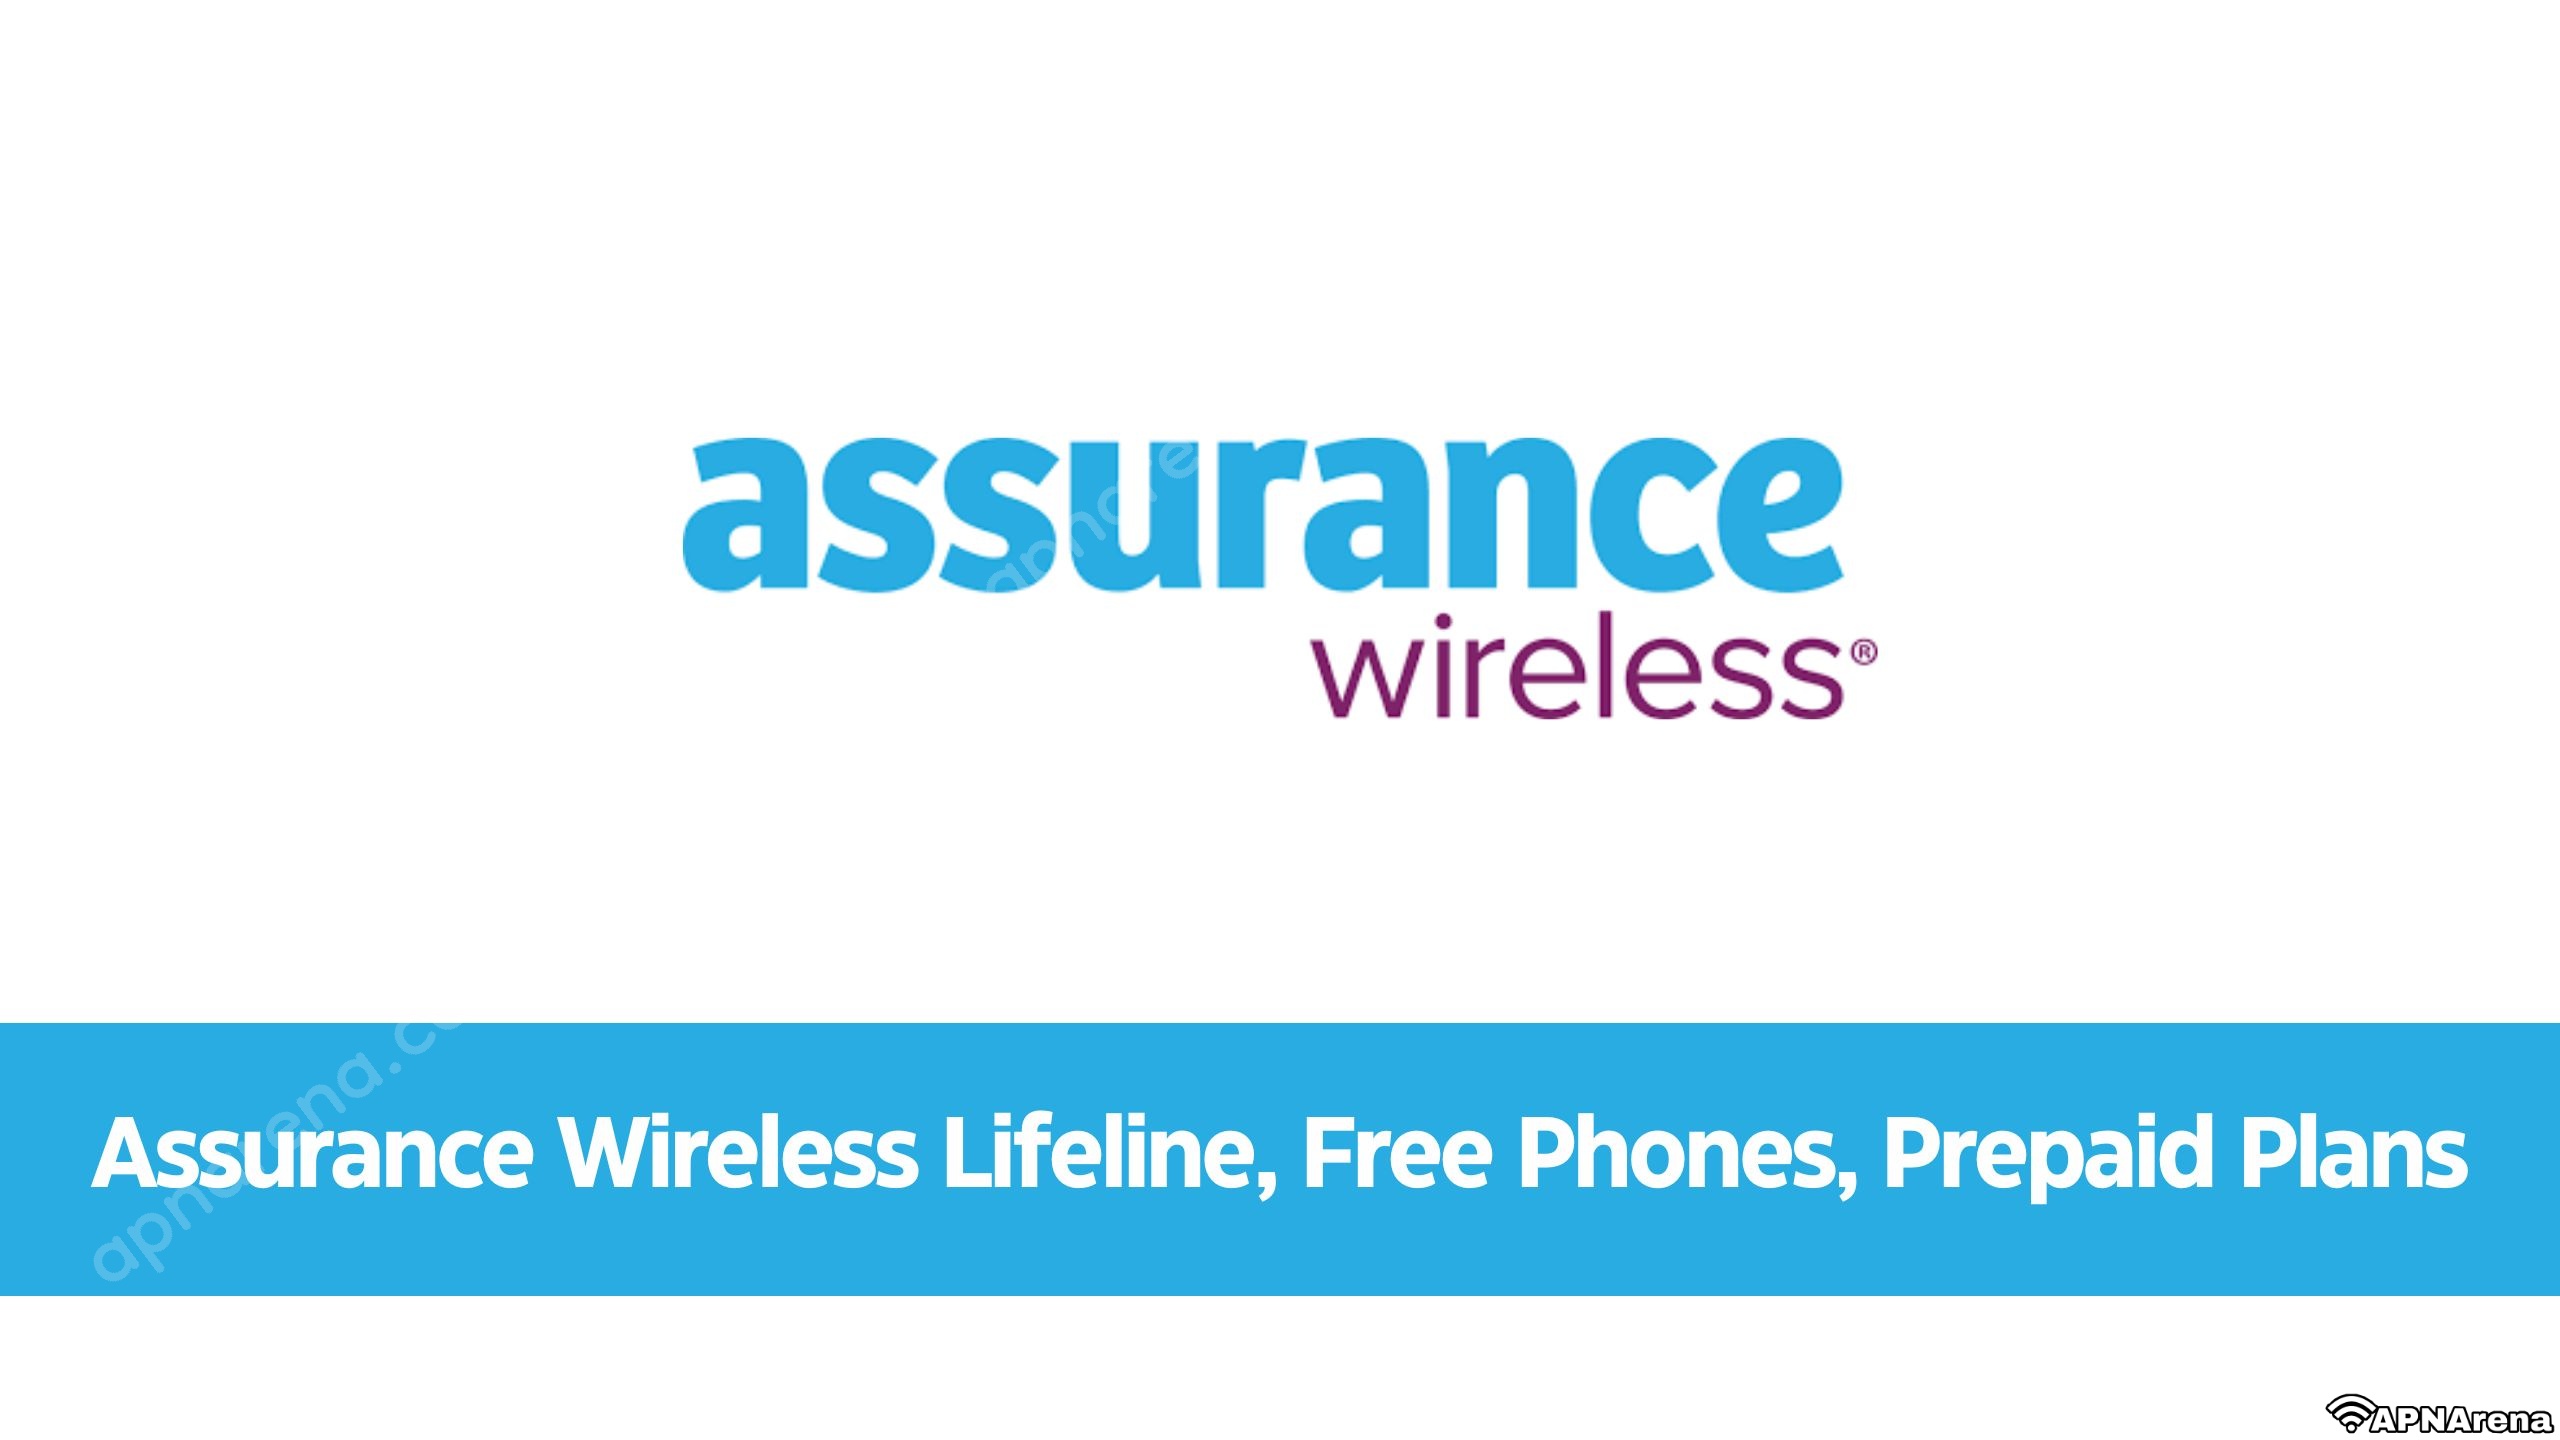 Assurance Wireless Unlimited Data Plans, Minutes, Texts, Hotspot, Lifeline Plan and free phones